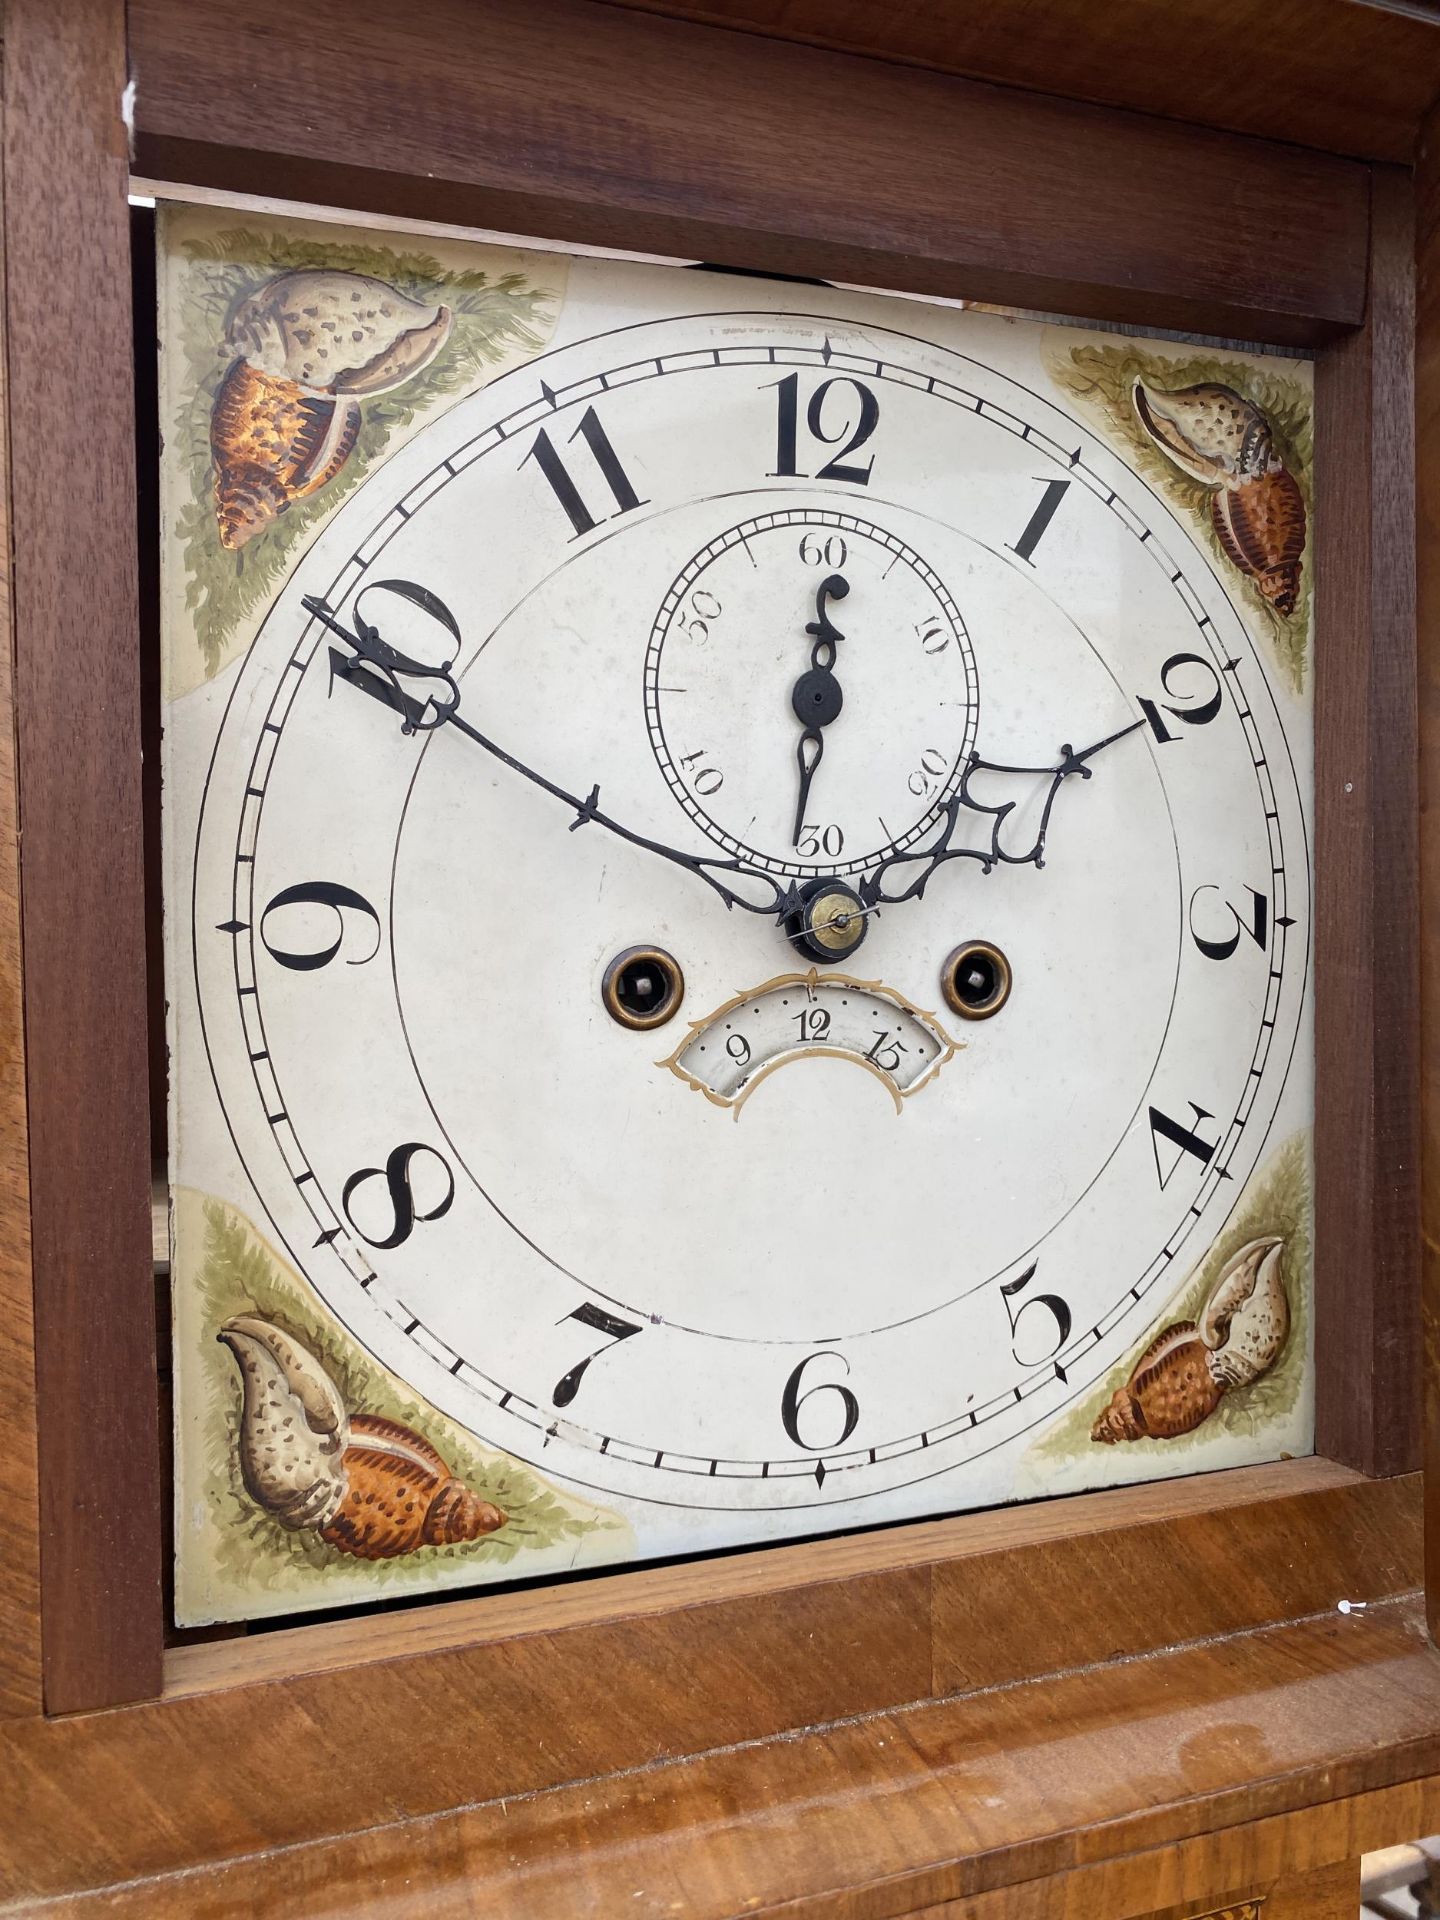 A 19TH CENTURY STYLE WALNUT AND INLAID LONGCASE CLOCK WITH PAINTED DIAL - Image 6 of 6